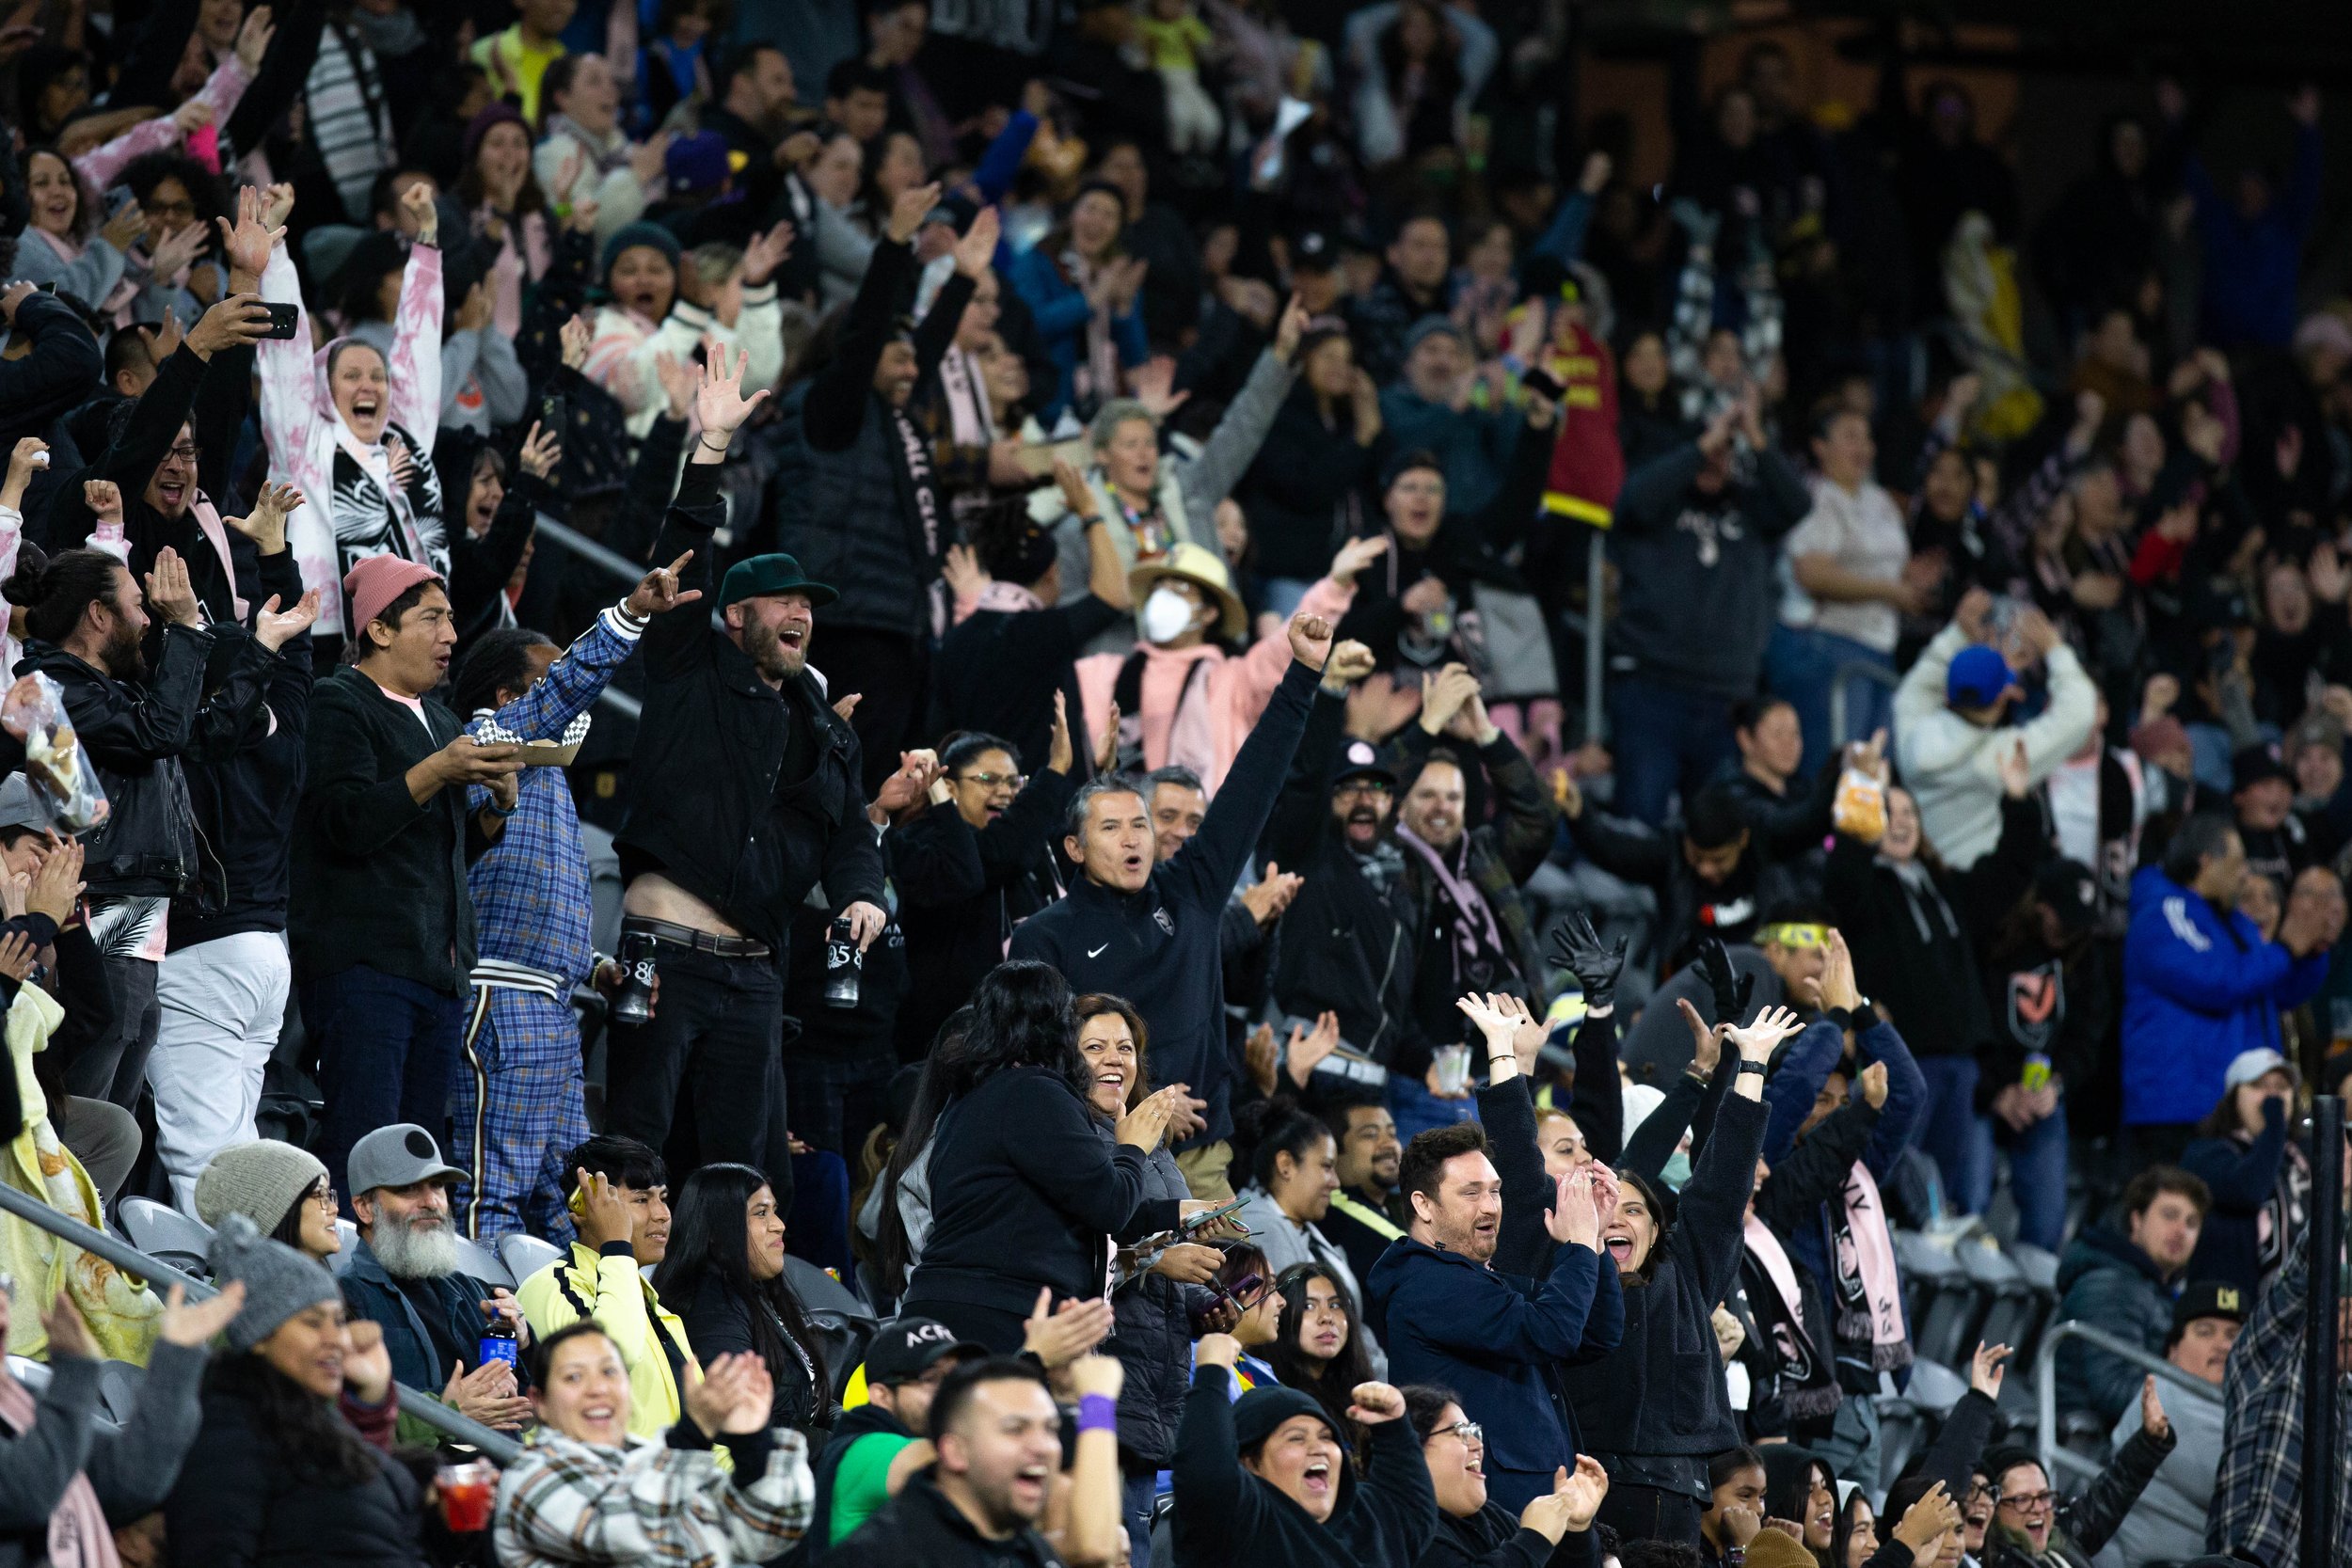  Angel City Football Club(ACFC) fans' cheering as the second goal of the game was scored adding to the lead 2-0 against Club America Femenil during their international friendly match on Wed. March 8, 2023 at BMO Stadium in Los Angeles, Calif. (Danilo